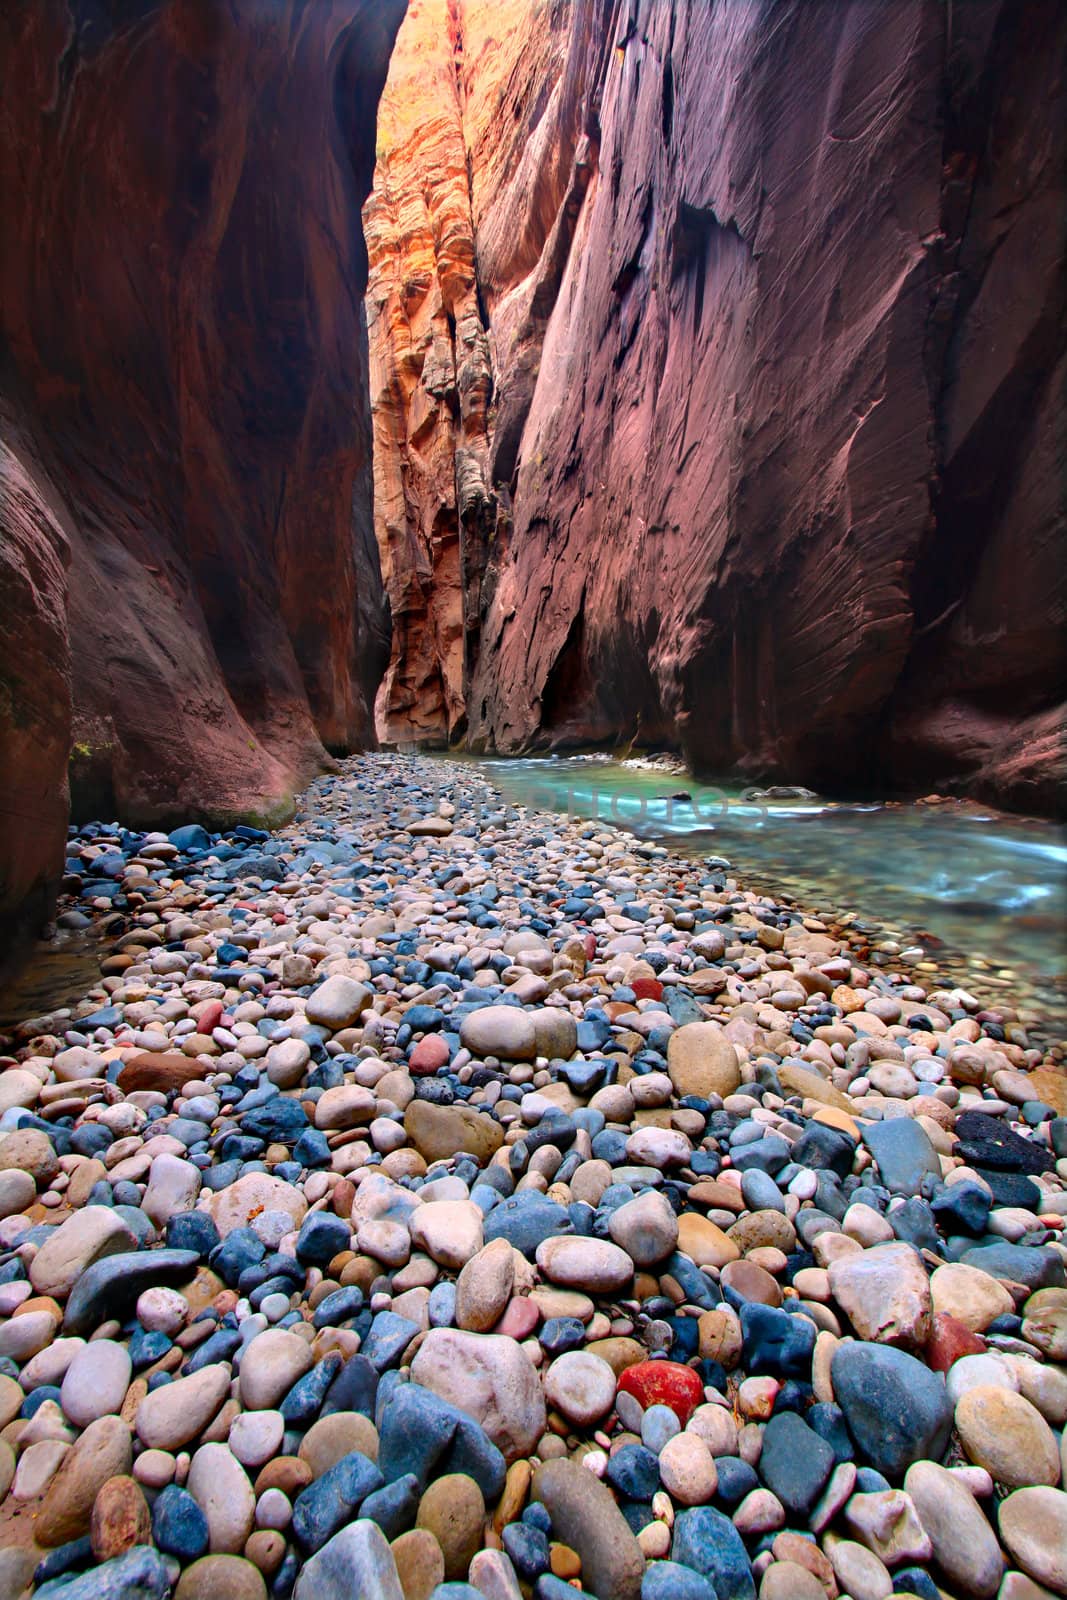 The Narrows of the Virgin River in Zion National Park of Utah.